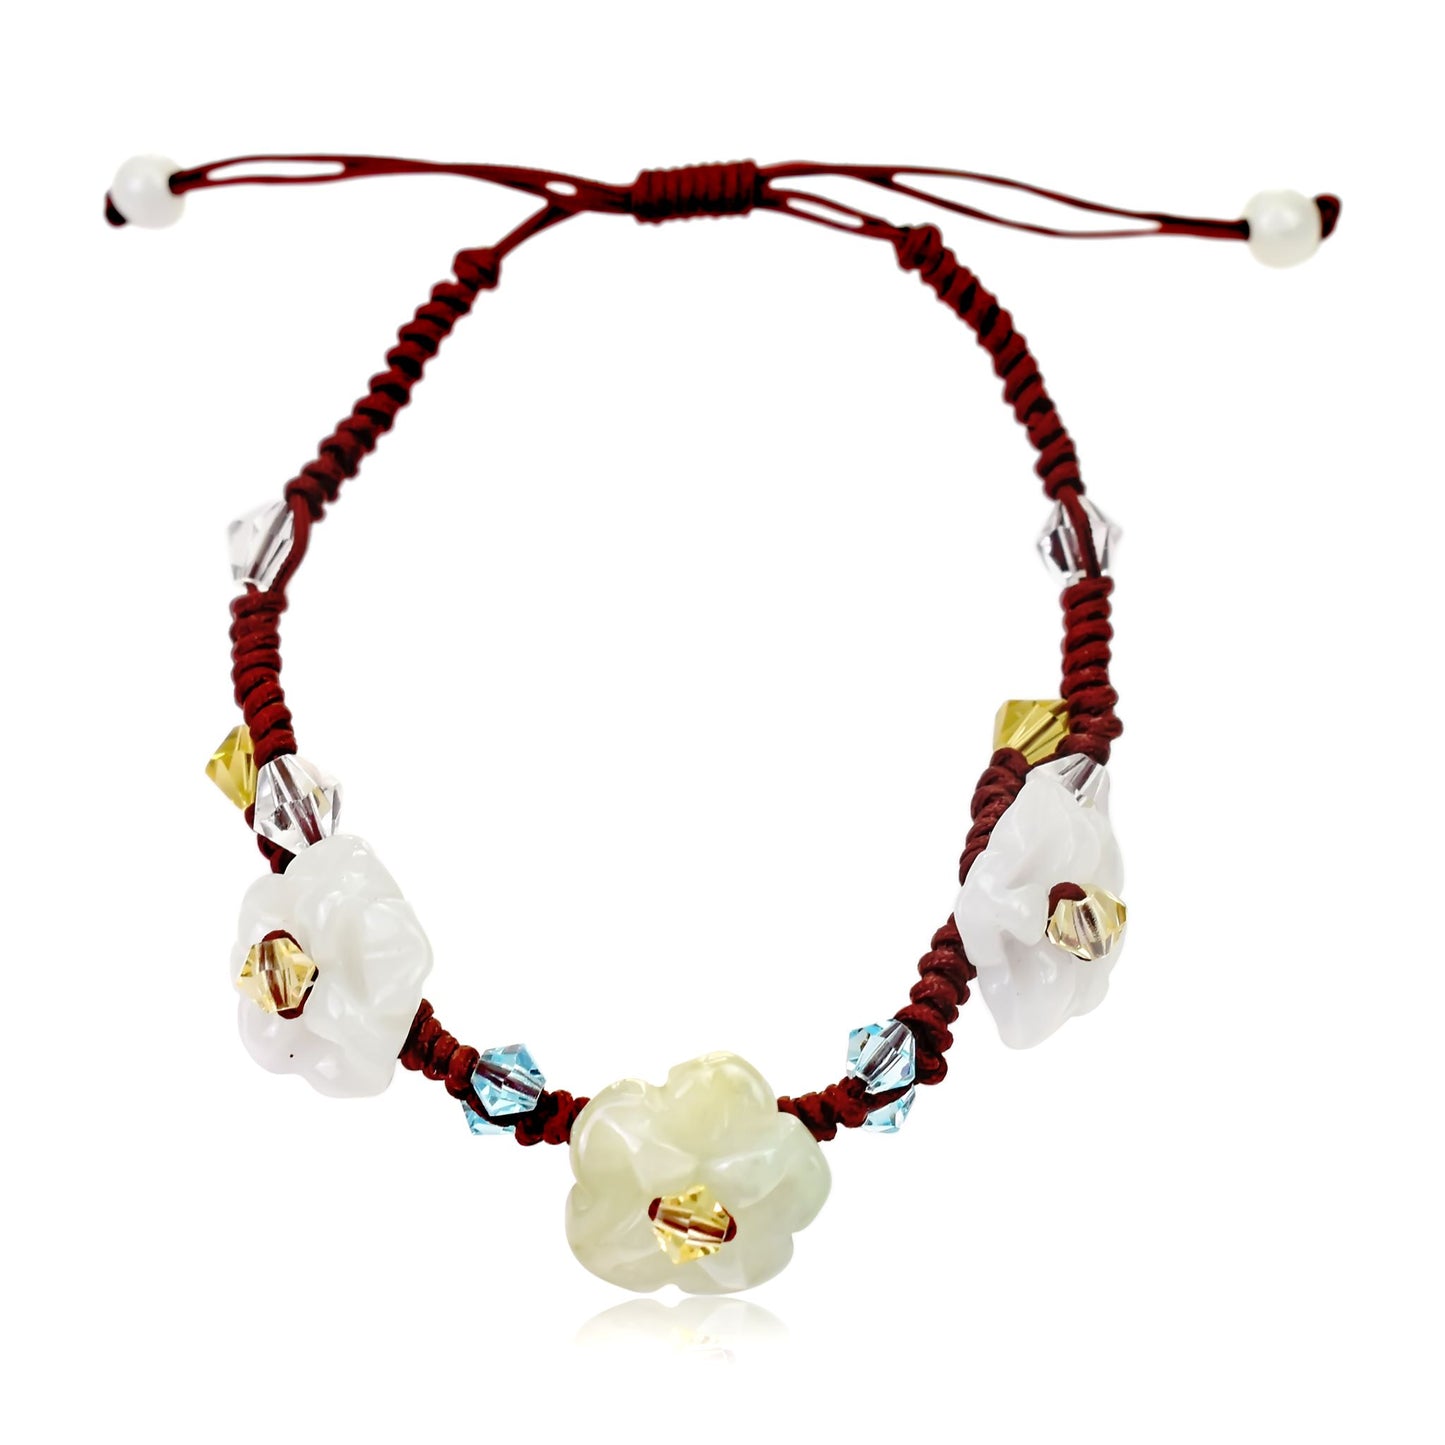 Wear Beauty with this Sparkling Crystal Scarlet Pimpernel Flower Bracelet made with Brown Cord